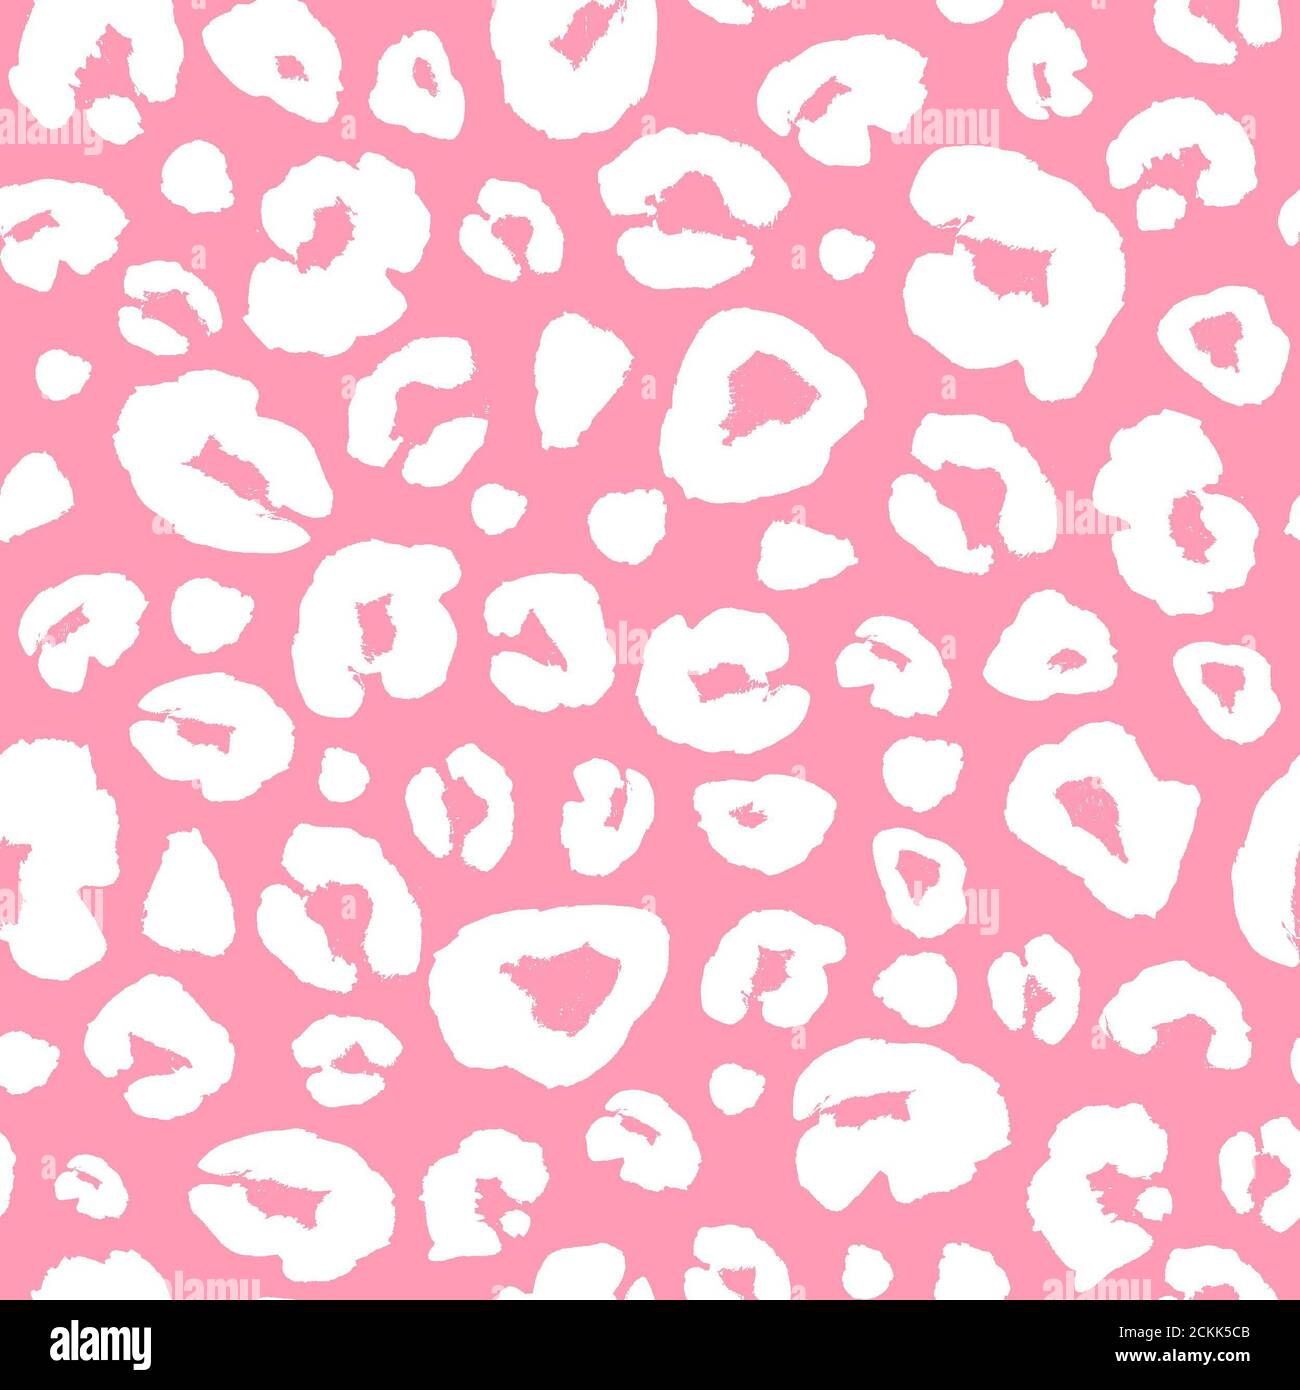 Leopard skin print seamless pattern background. Animal fur spot abstract camouflage texture. Pink and white hand drawn spotted print for textile, fabr Stock Photo